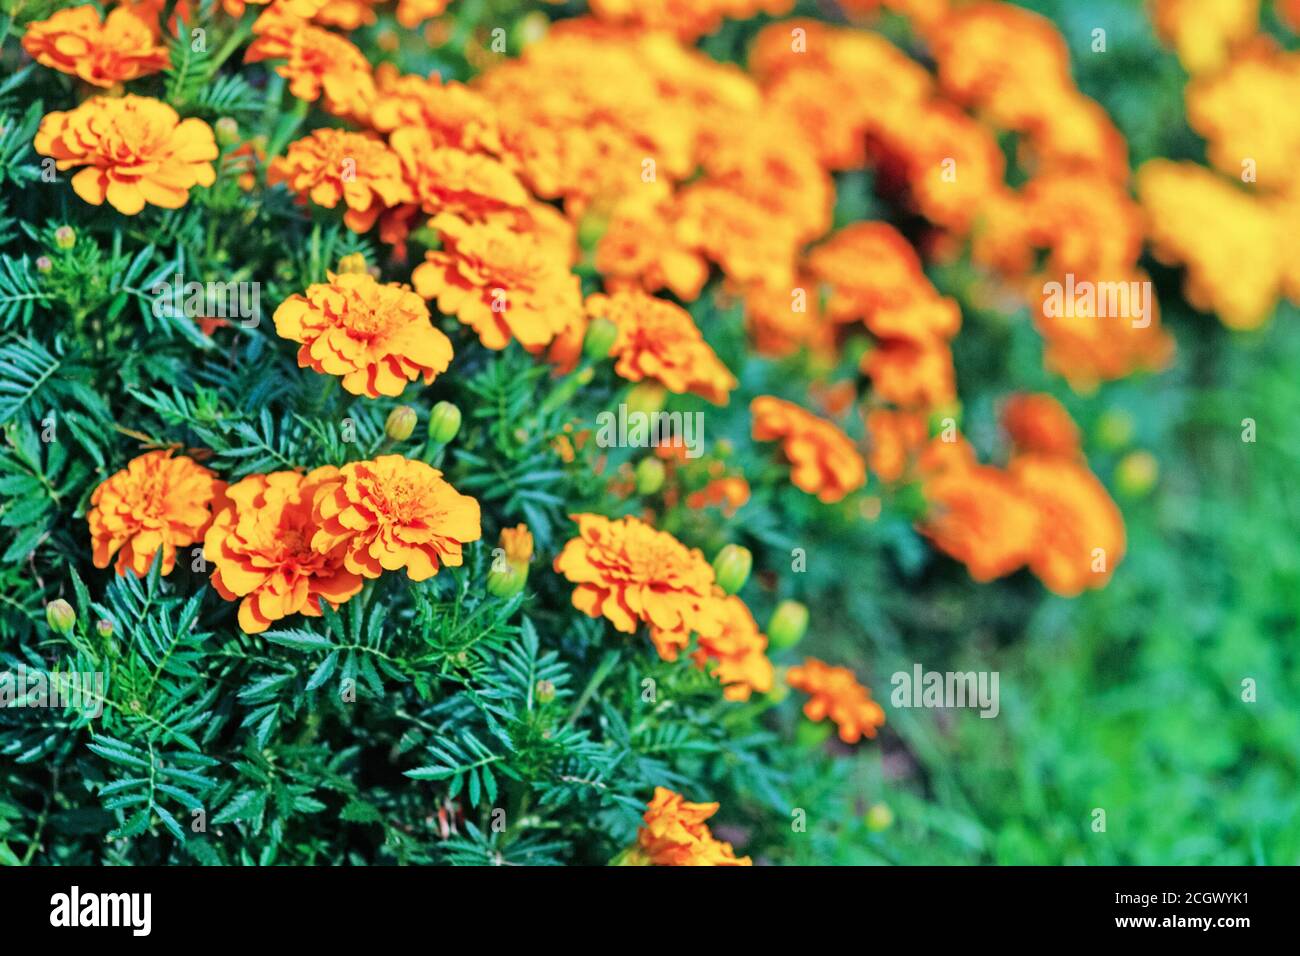 Marigolds plantation in bloom - Tagetes erecta L. cultivated at organic farm Stock Photo